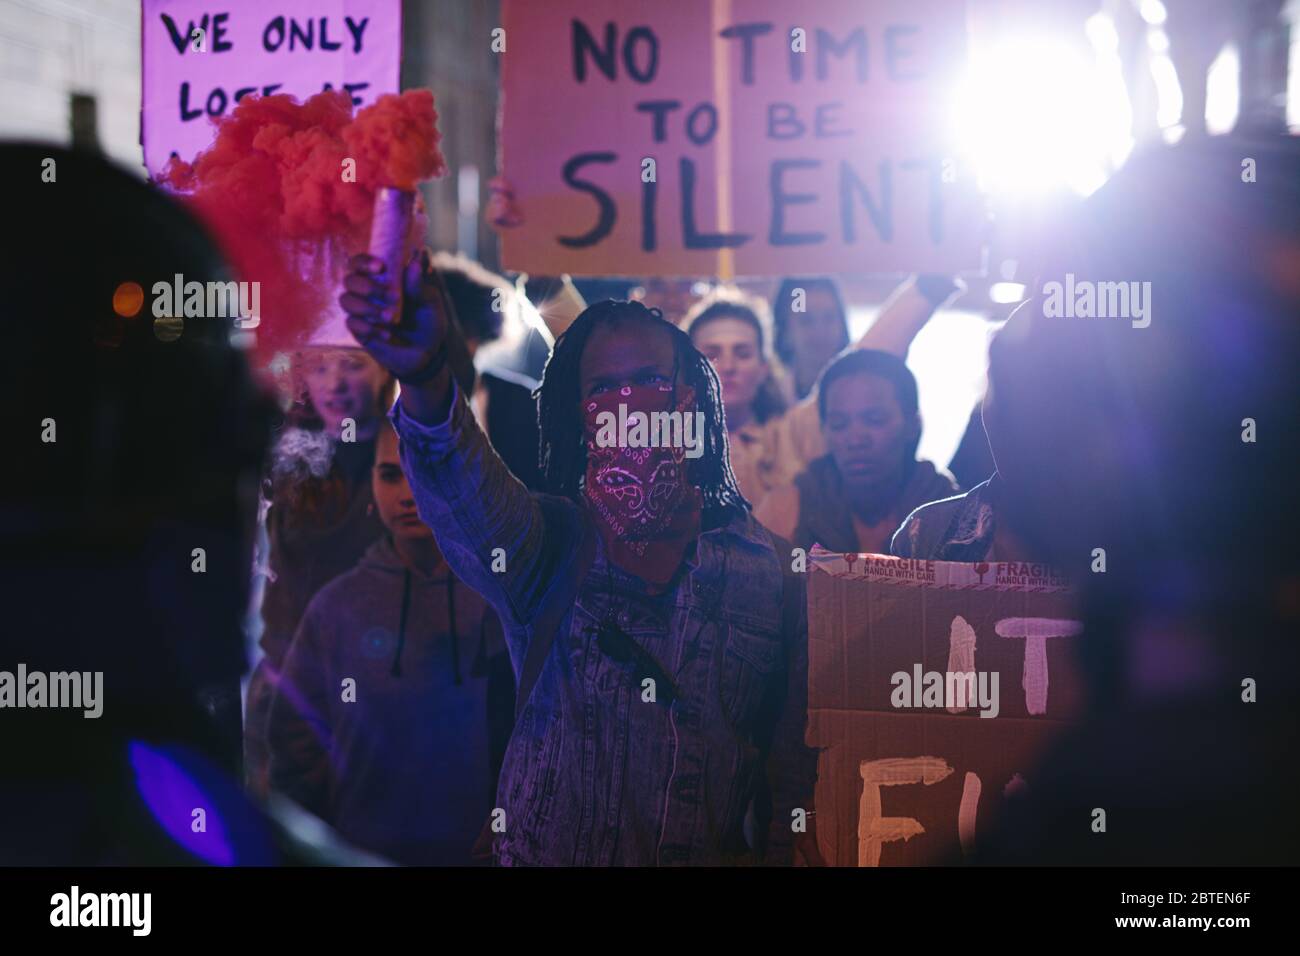 Protestors demonstrating with smoke grenades in front of the security force at night. Anti-government protest by the social activist group. Stock Photo